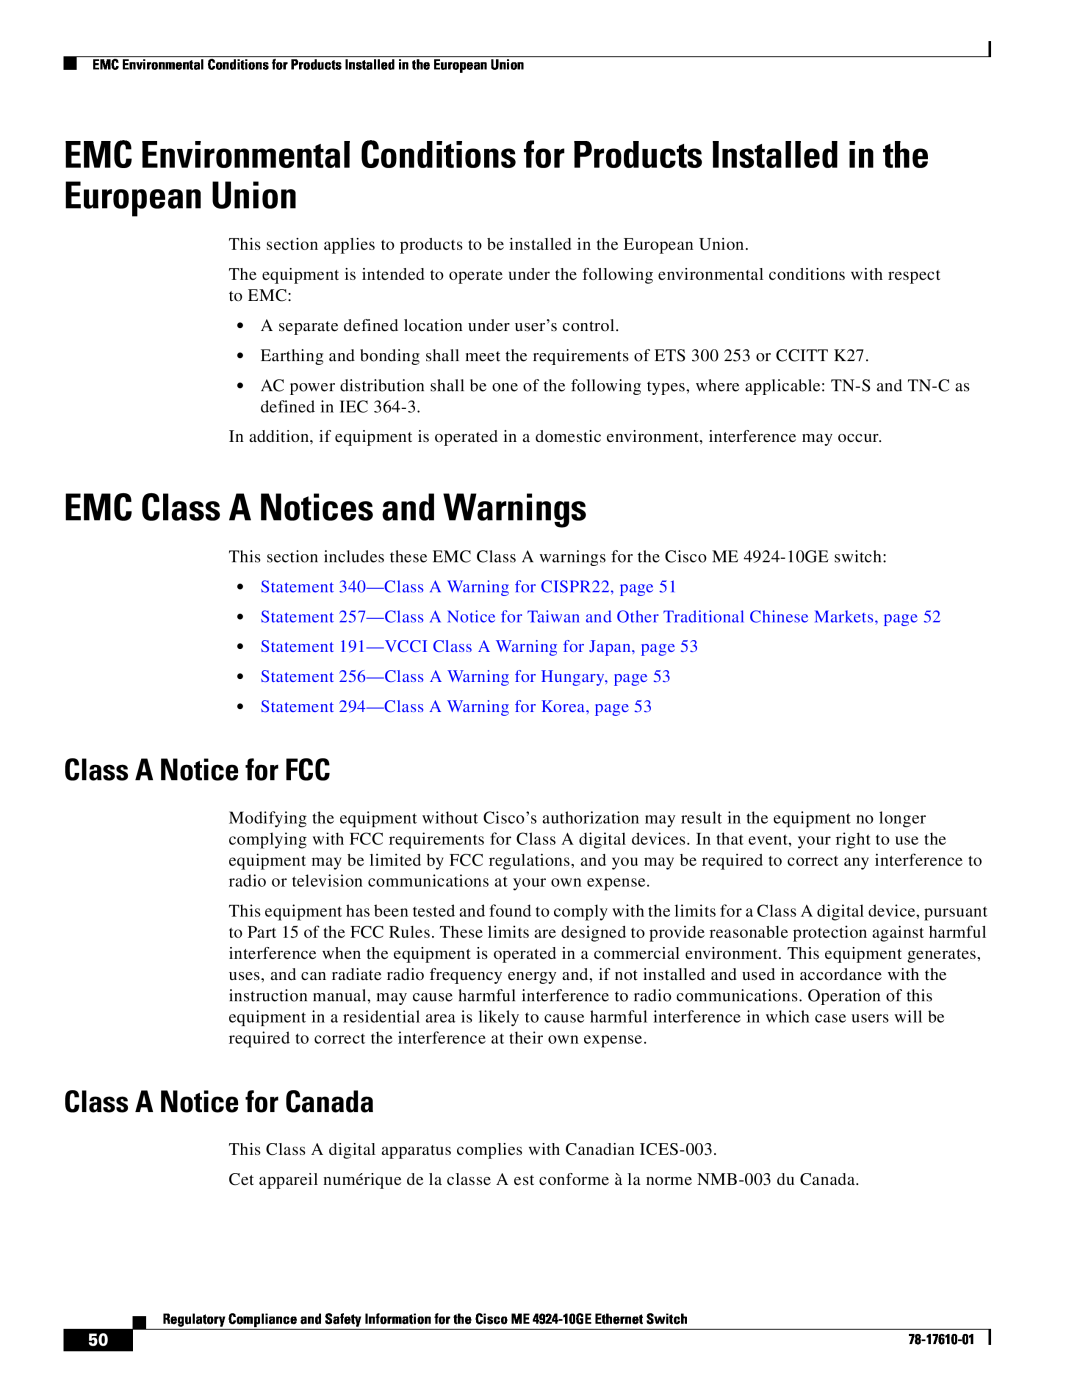 Cisco Systems ME 4924-10GE EMC Class A Notices and Warnings, Class A Notice for FCC, Class A Notice for Canada 